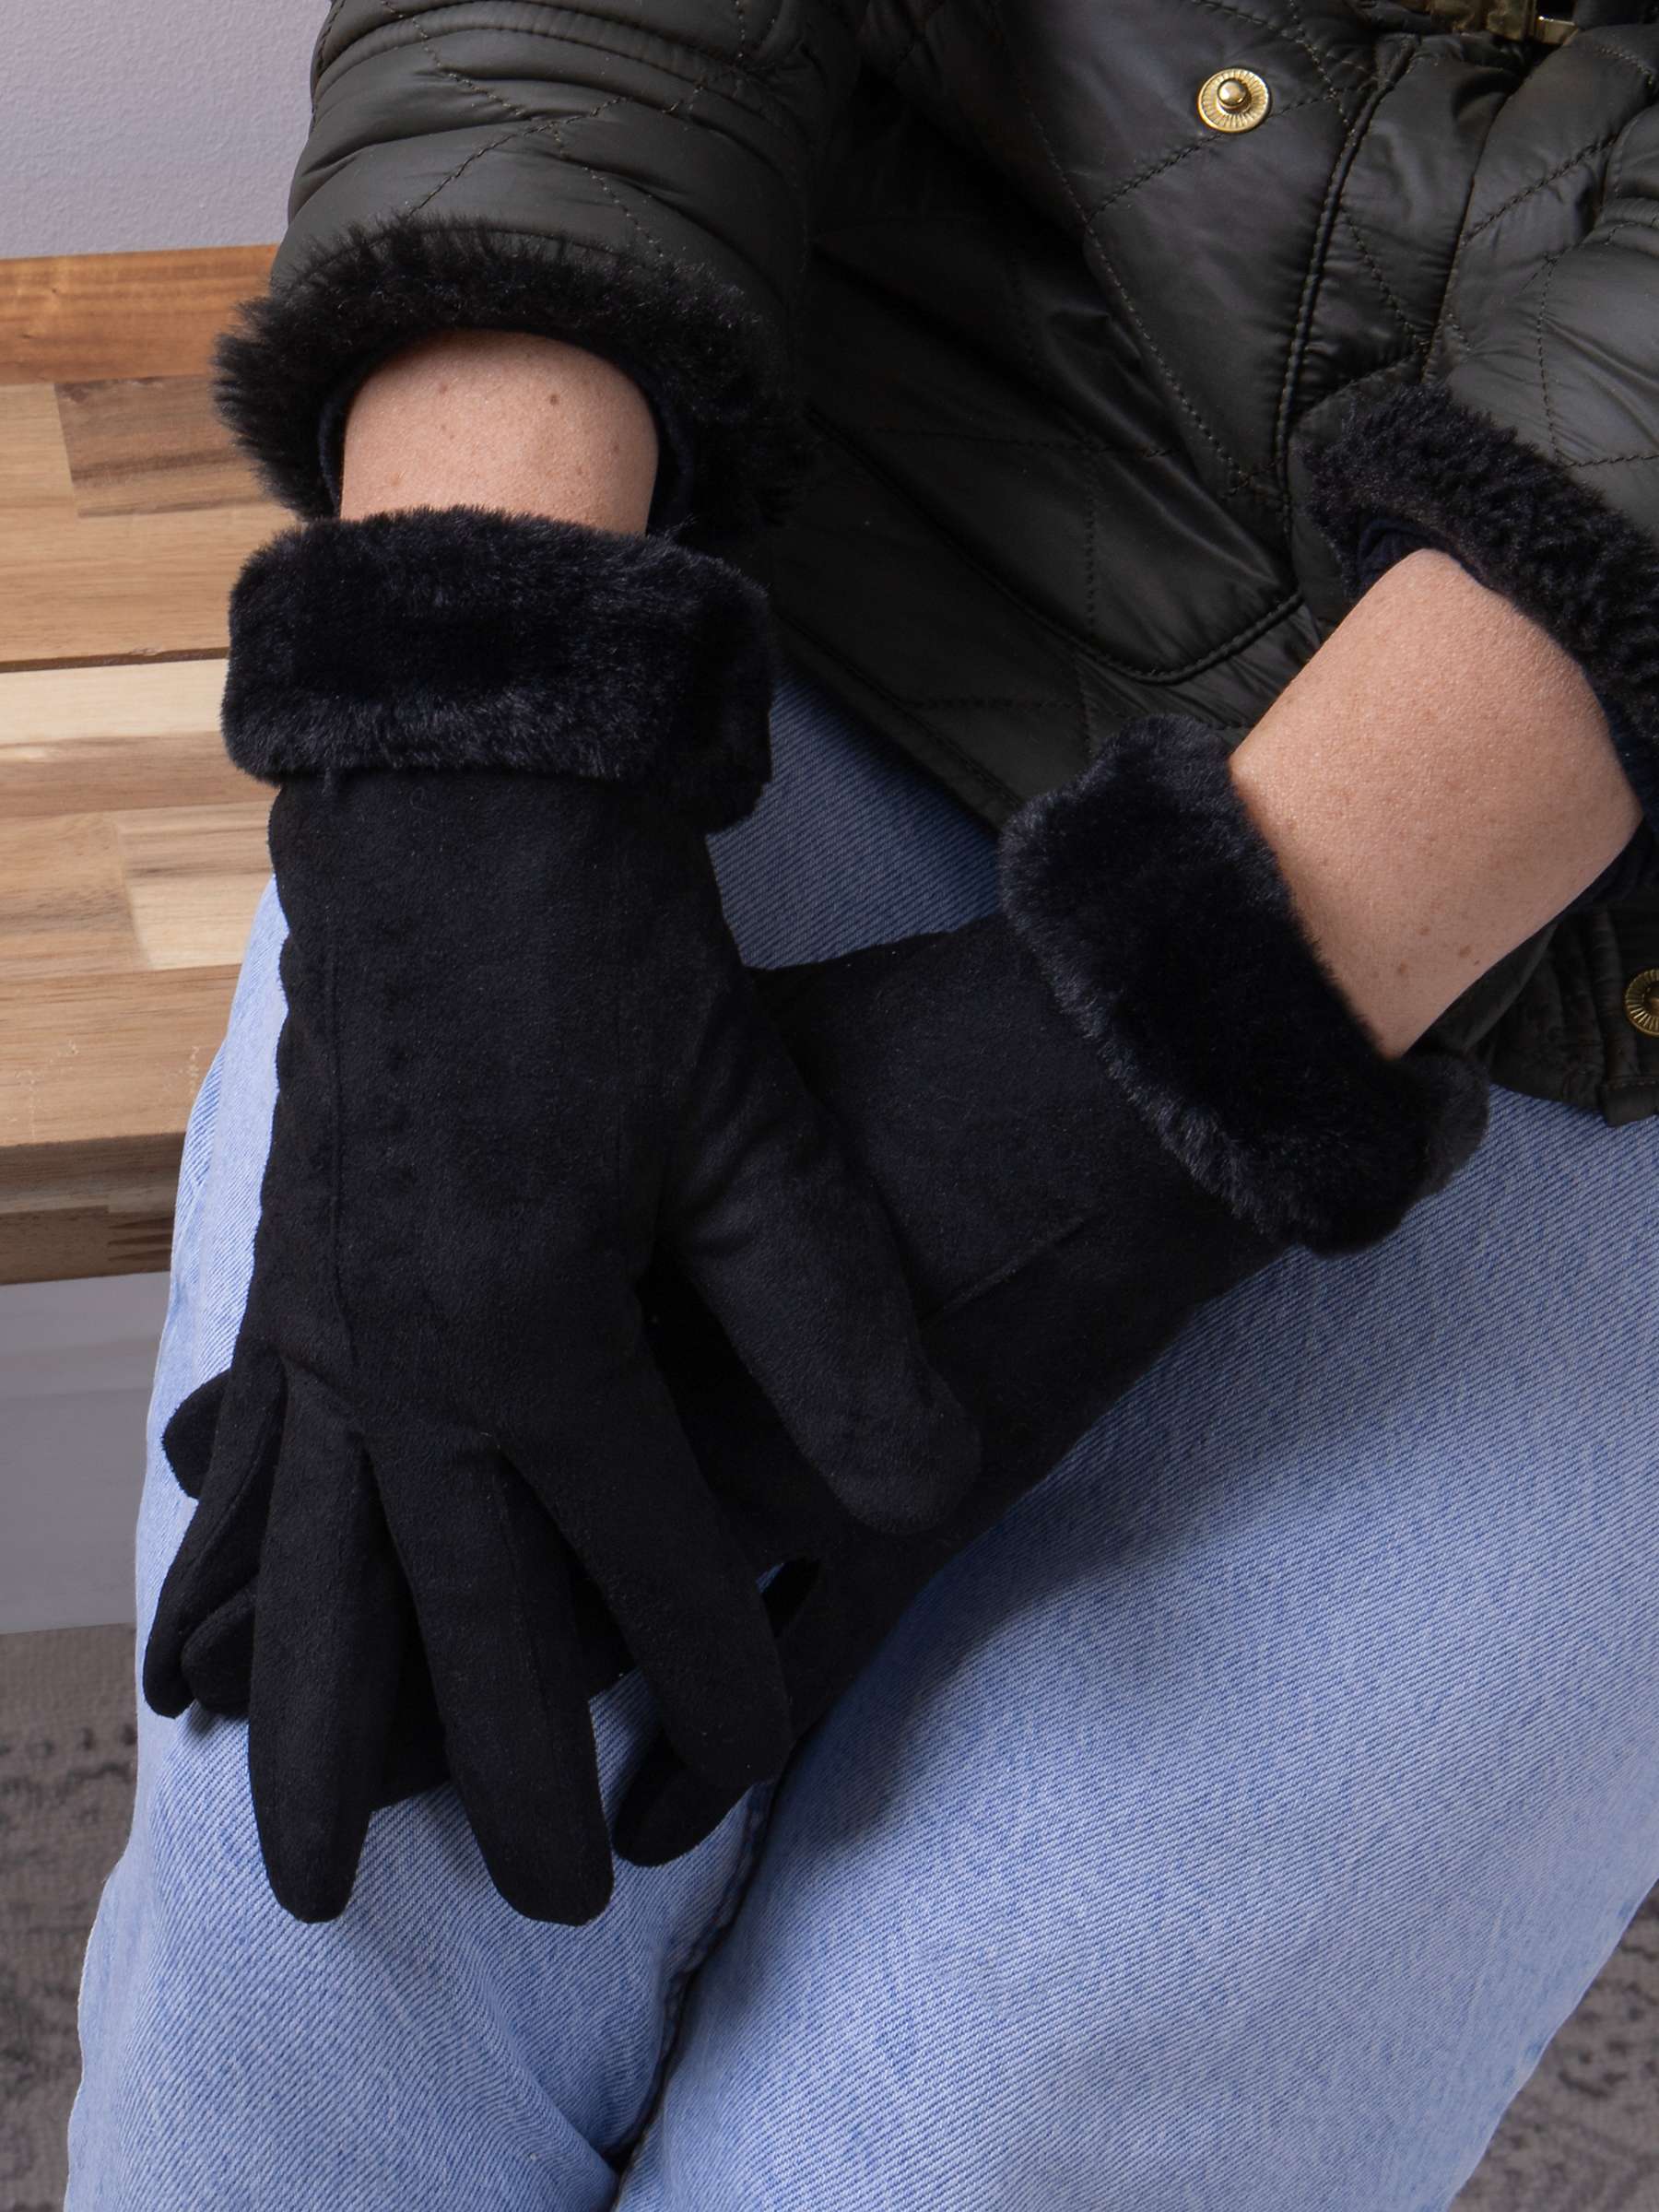 Buy totes Ladies One Point Faux Suede Gloves, Black Online at johnlewis.com